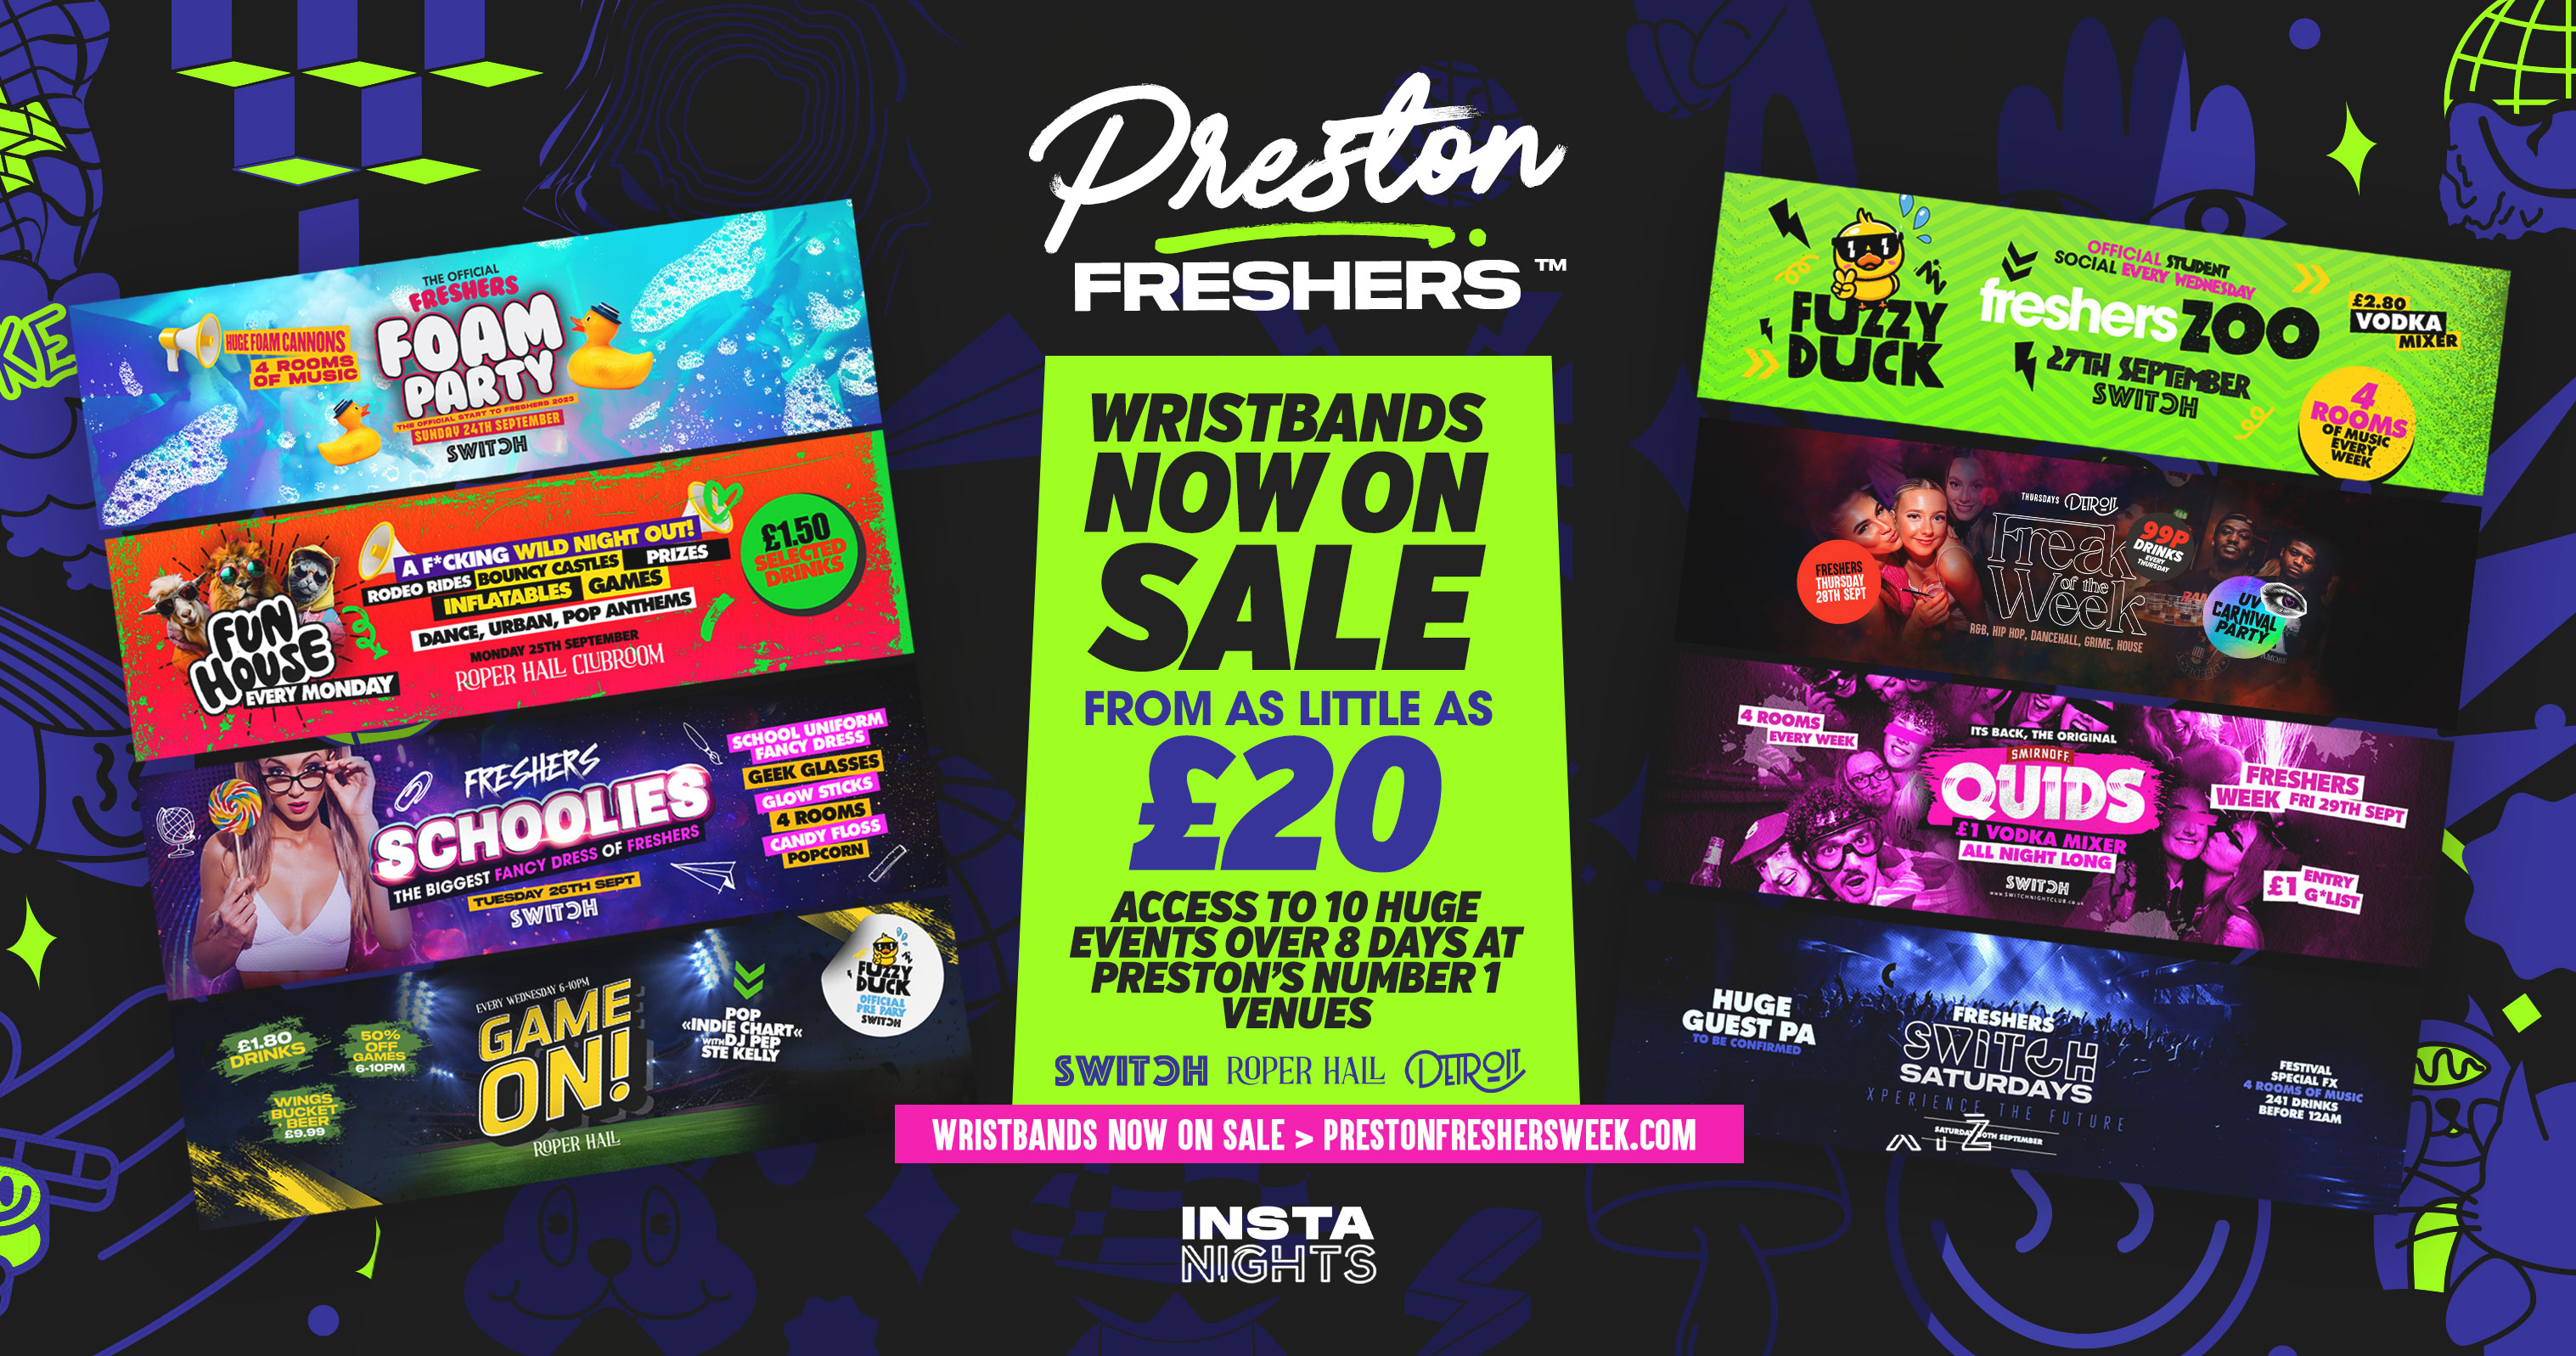 Preston Freshers Official Wristband / Line Up 2023 – Uclan Students | NOW ON SALE